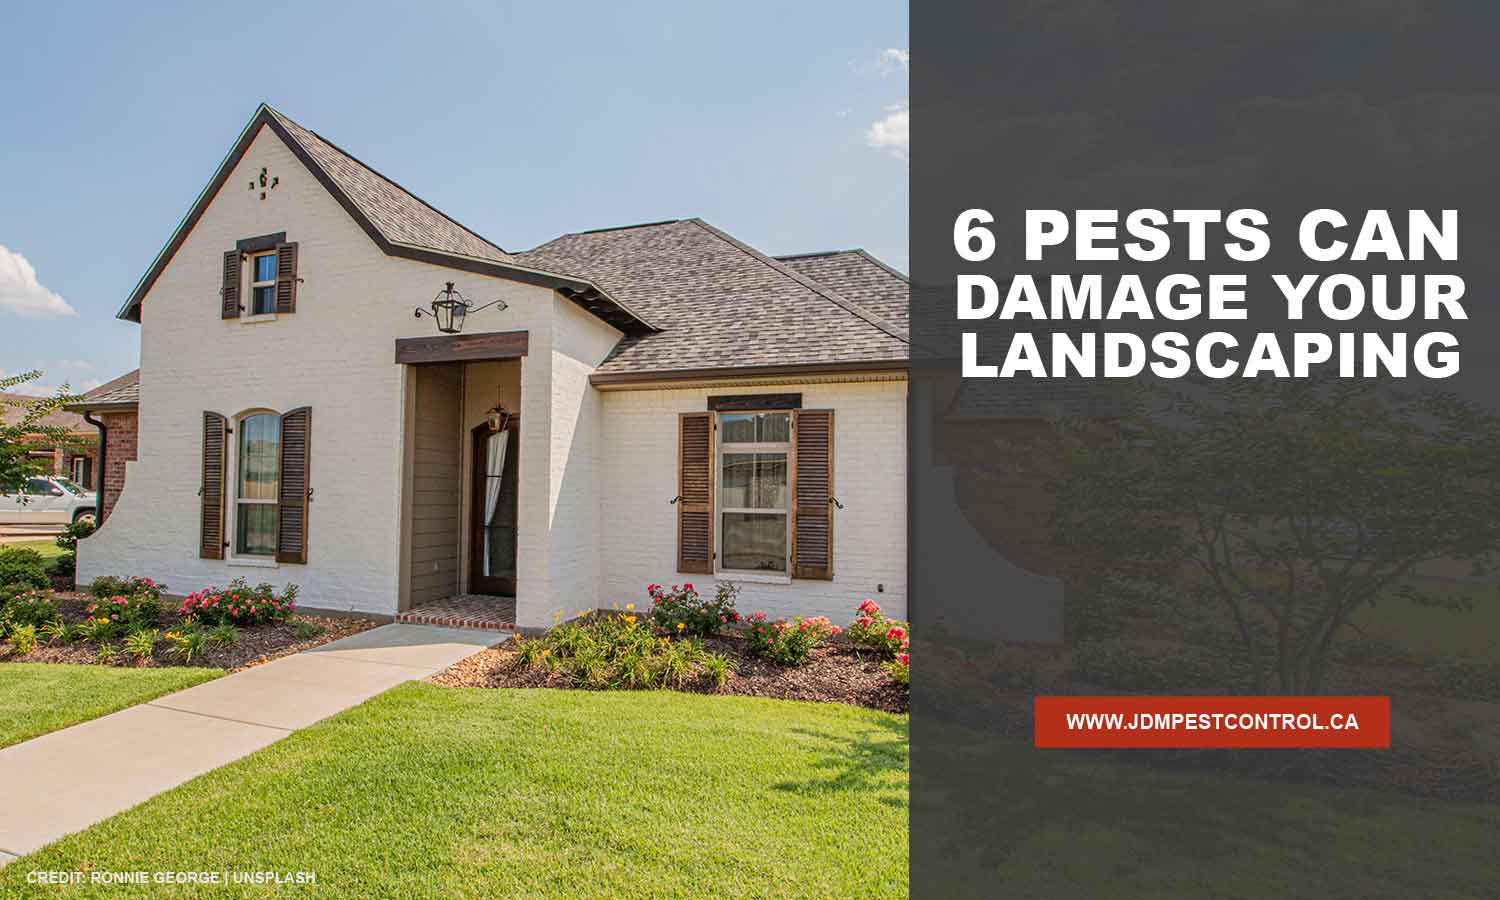 6 Pests Can Damage Your Landscaping